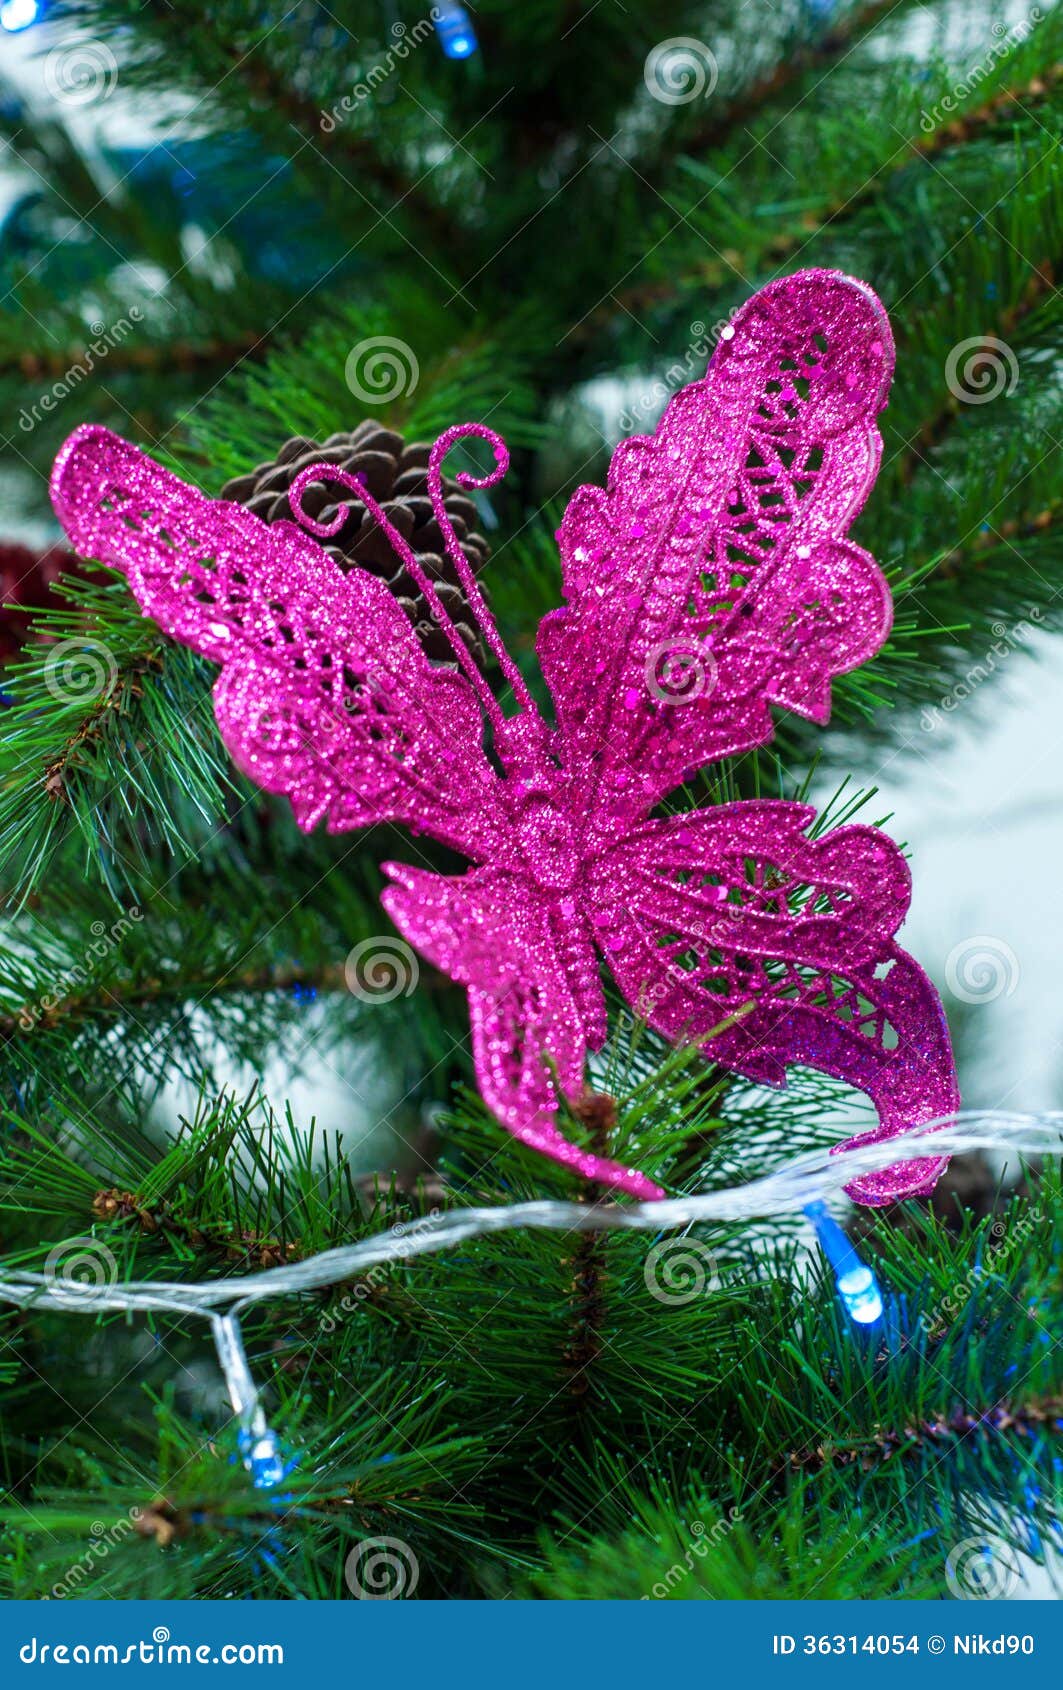 Pink Butterfly On Christmas Tree Decoration - Pine Tree 